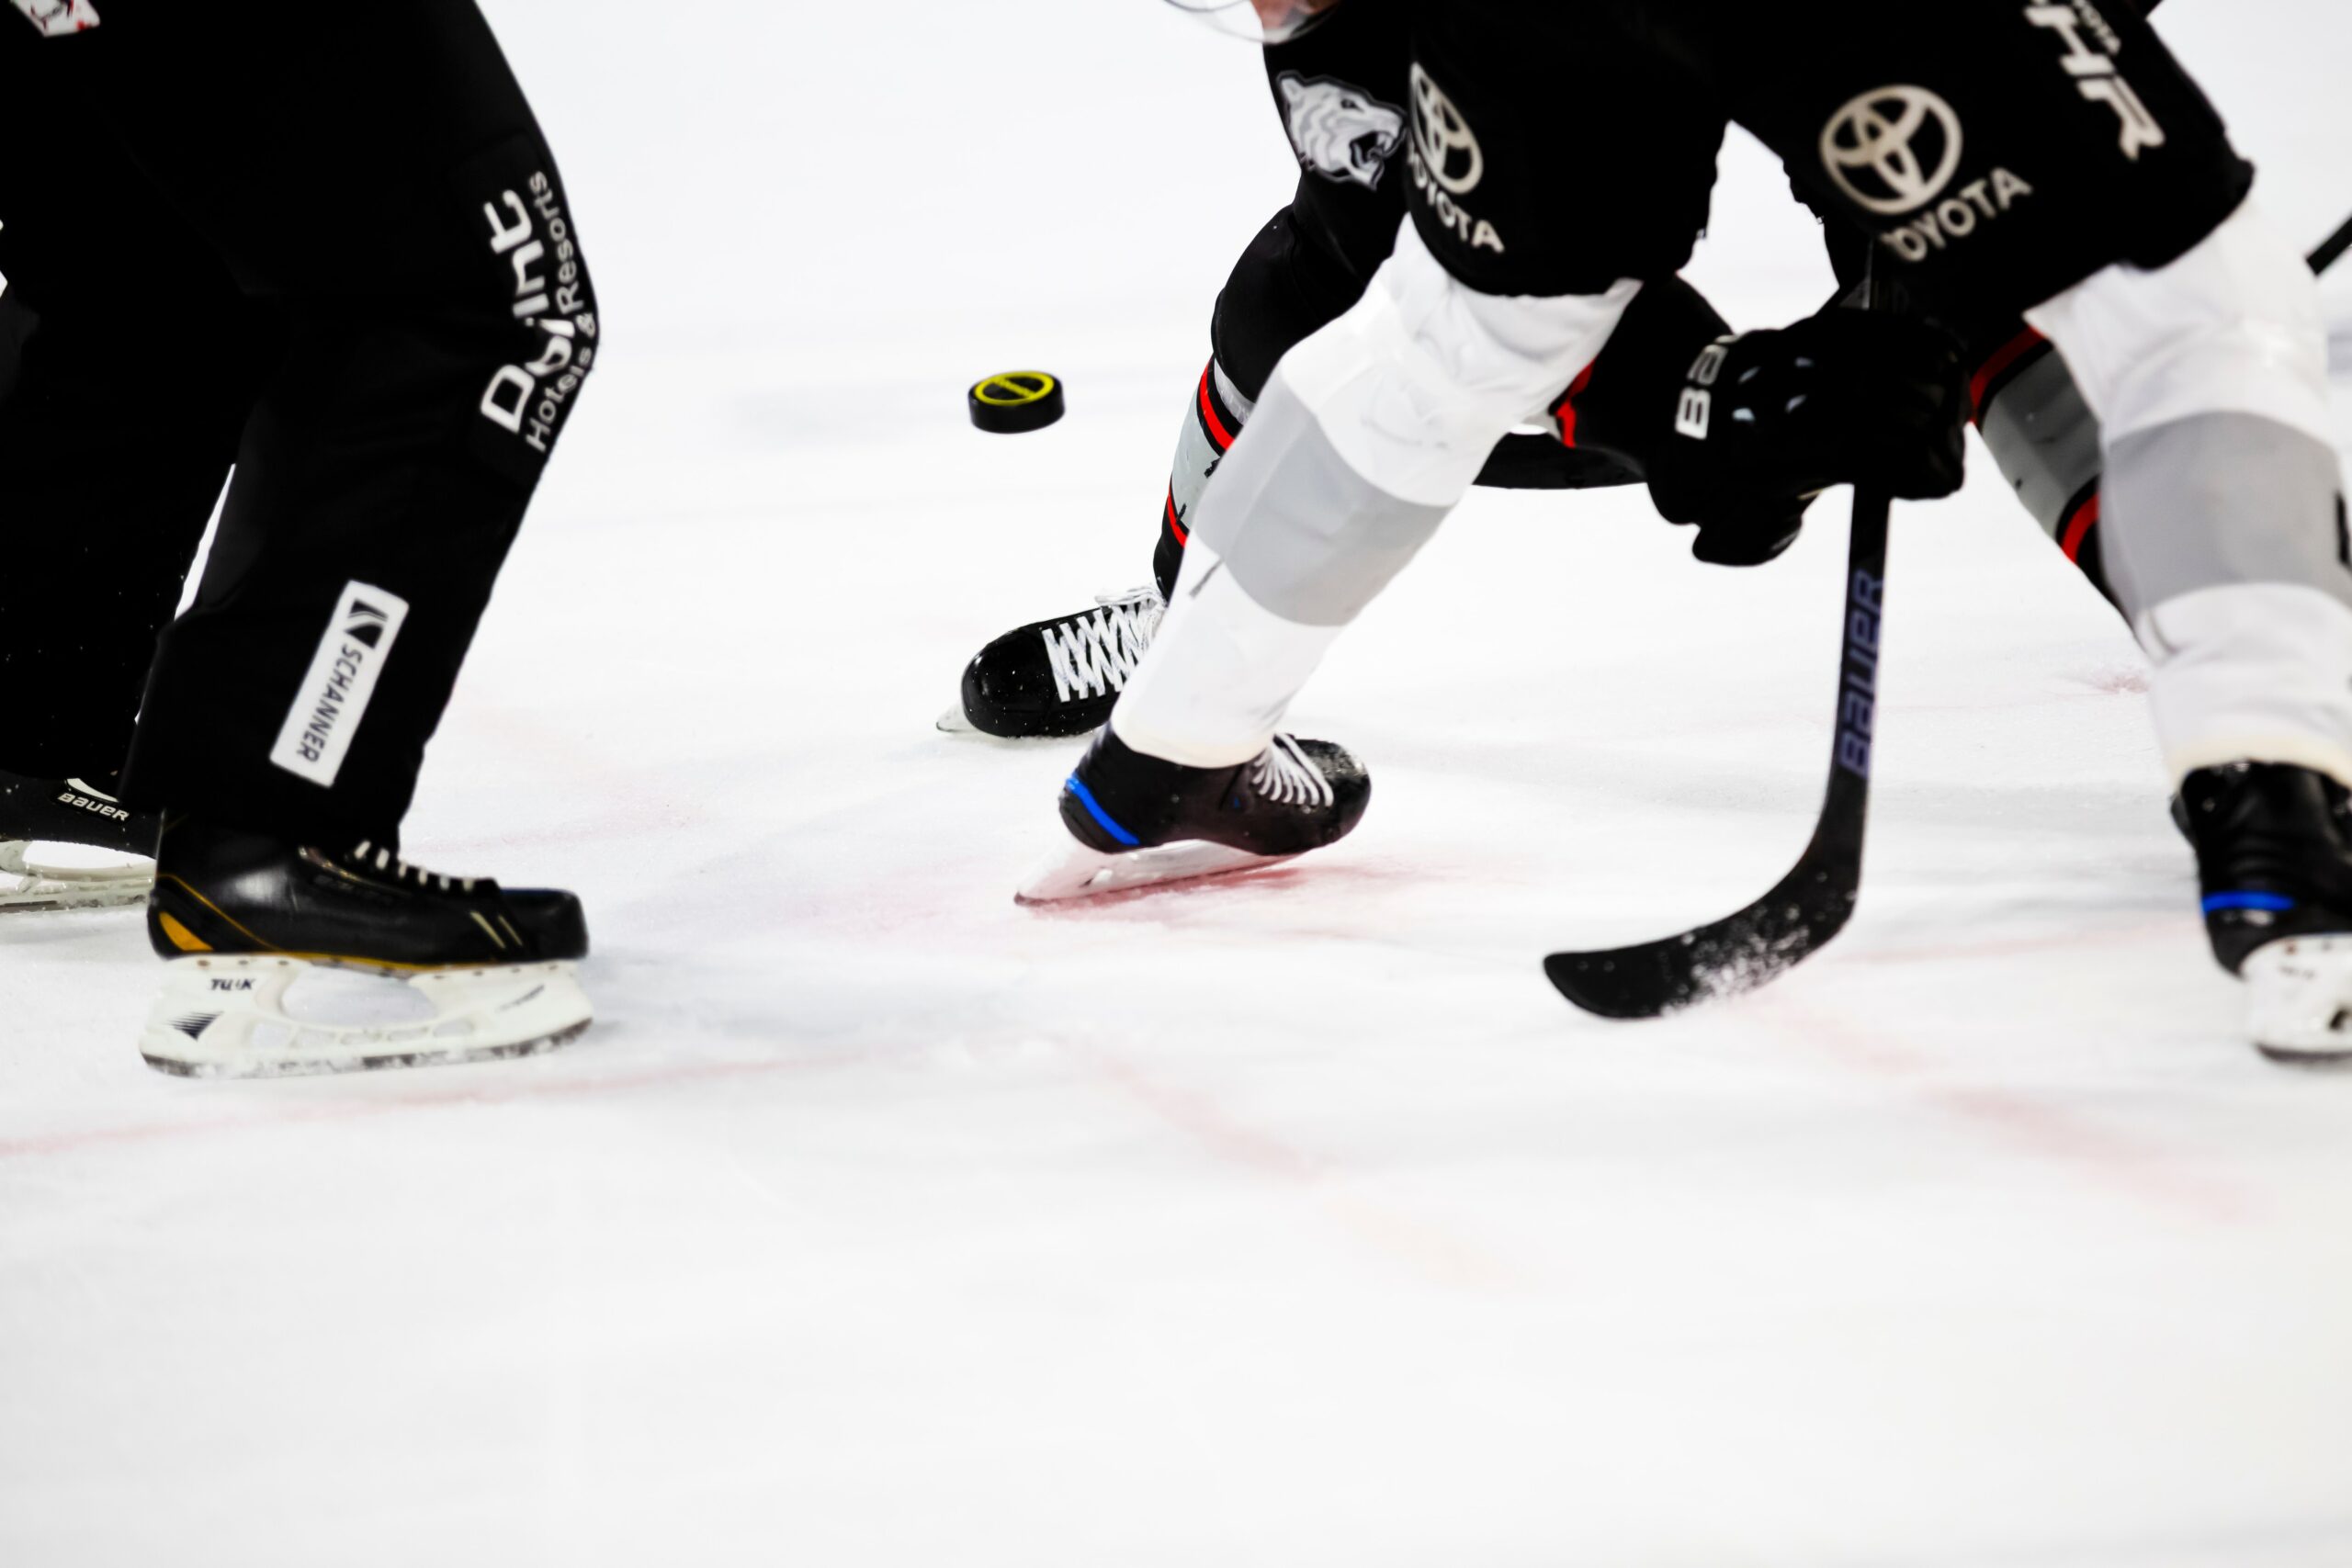 Sports Market Segmentation: The 2023 NHL Playoffs. Sure, here's a shorter meta description for "Sports Market Segmentation: The 2023 NHL Playoffs": Learn how sports market segmentation can help your business reach a new audience during the 2023 NHL Playoffs. Discover Skydeo's targeted ad solutions today